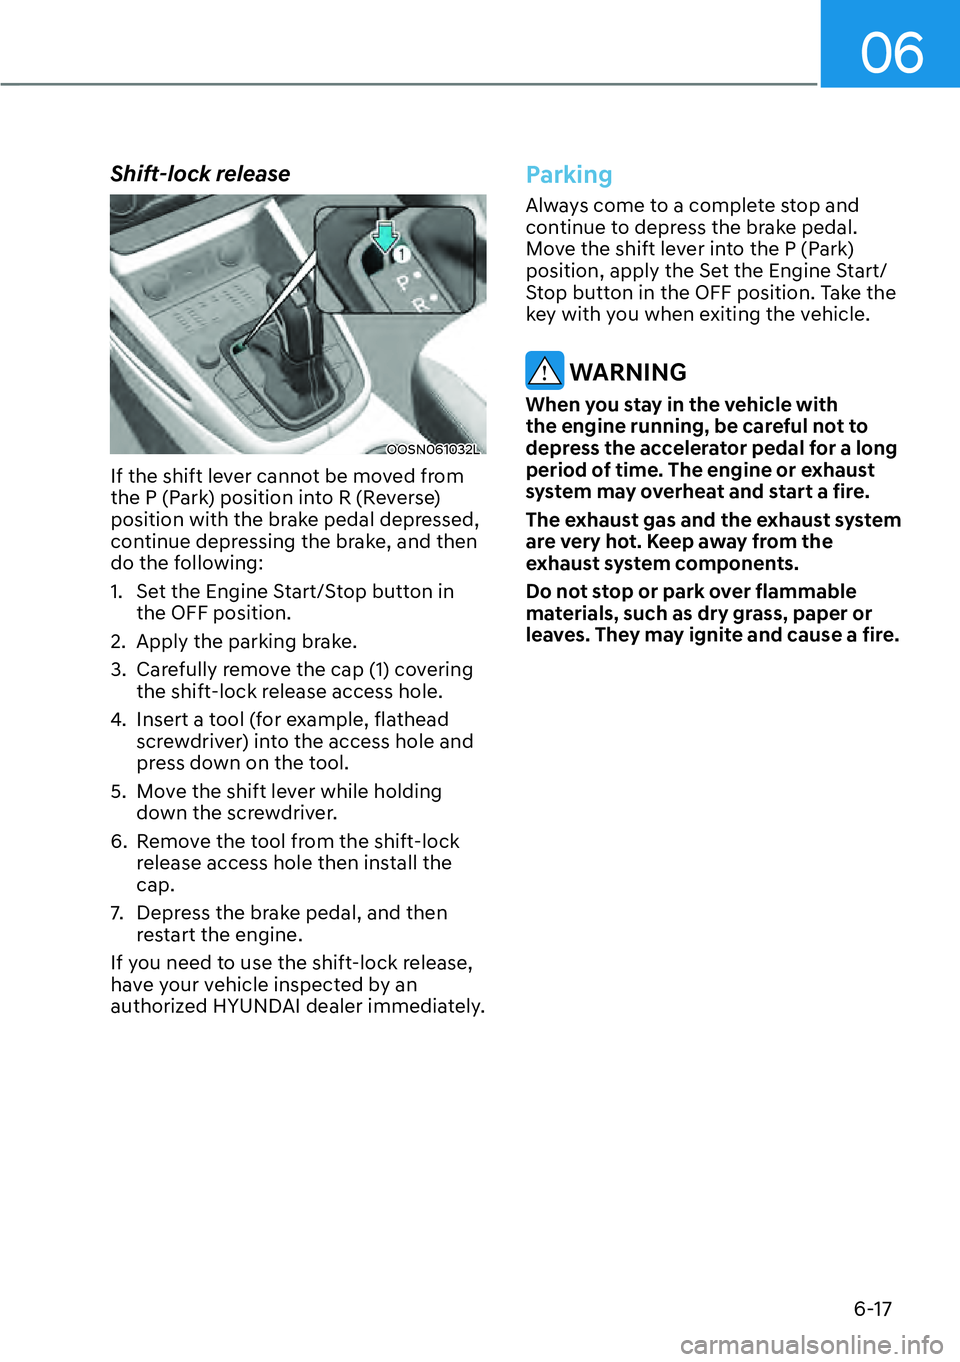 HYUNDAI KONA 2023  Owners Manual 06
6-17
Shift-lock release
OOSN061032L
If the shift lever cannot be moved from 
the P (Park) position into R (Reverse) 
position with the brake pedal depressed, 
continue depressing the brake, and the